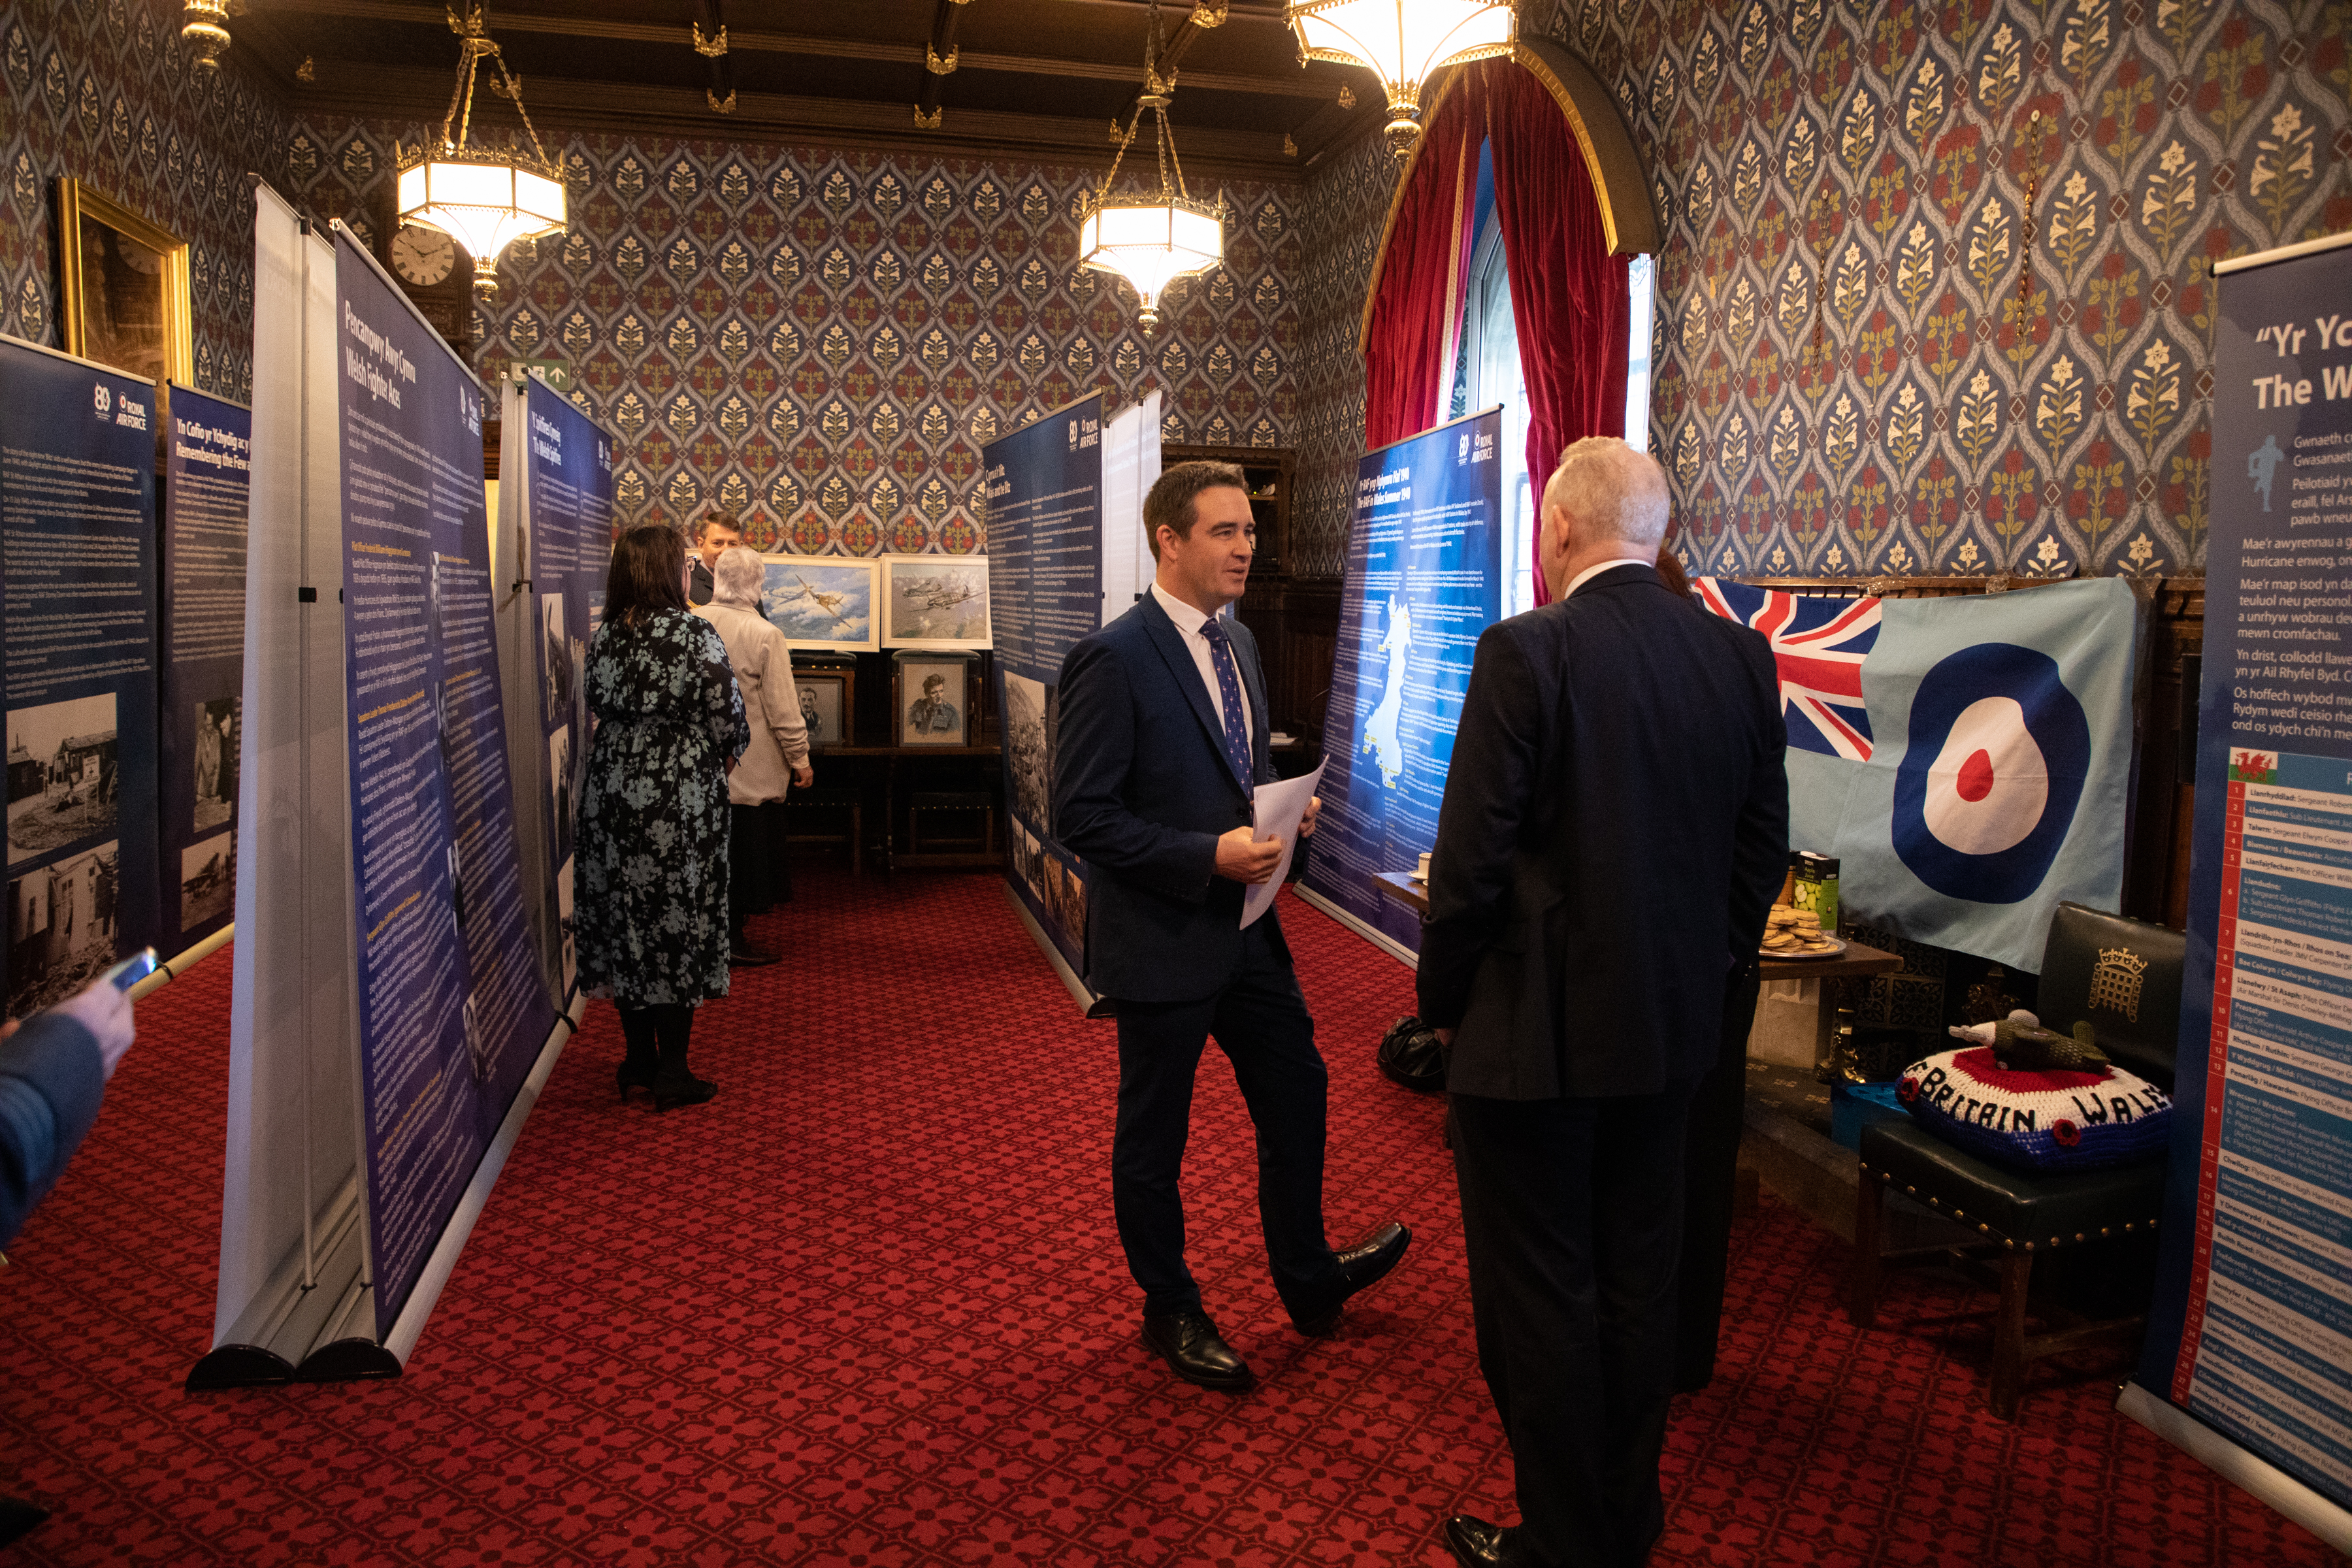 Image shows RAF aviator and civilians at exhibition.